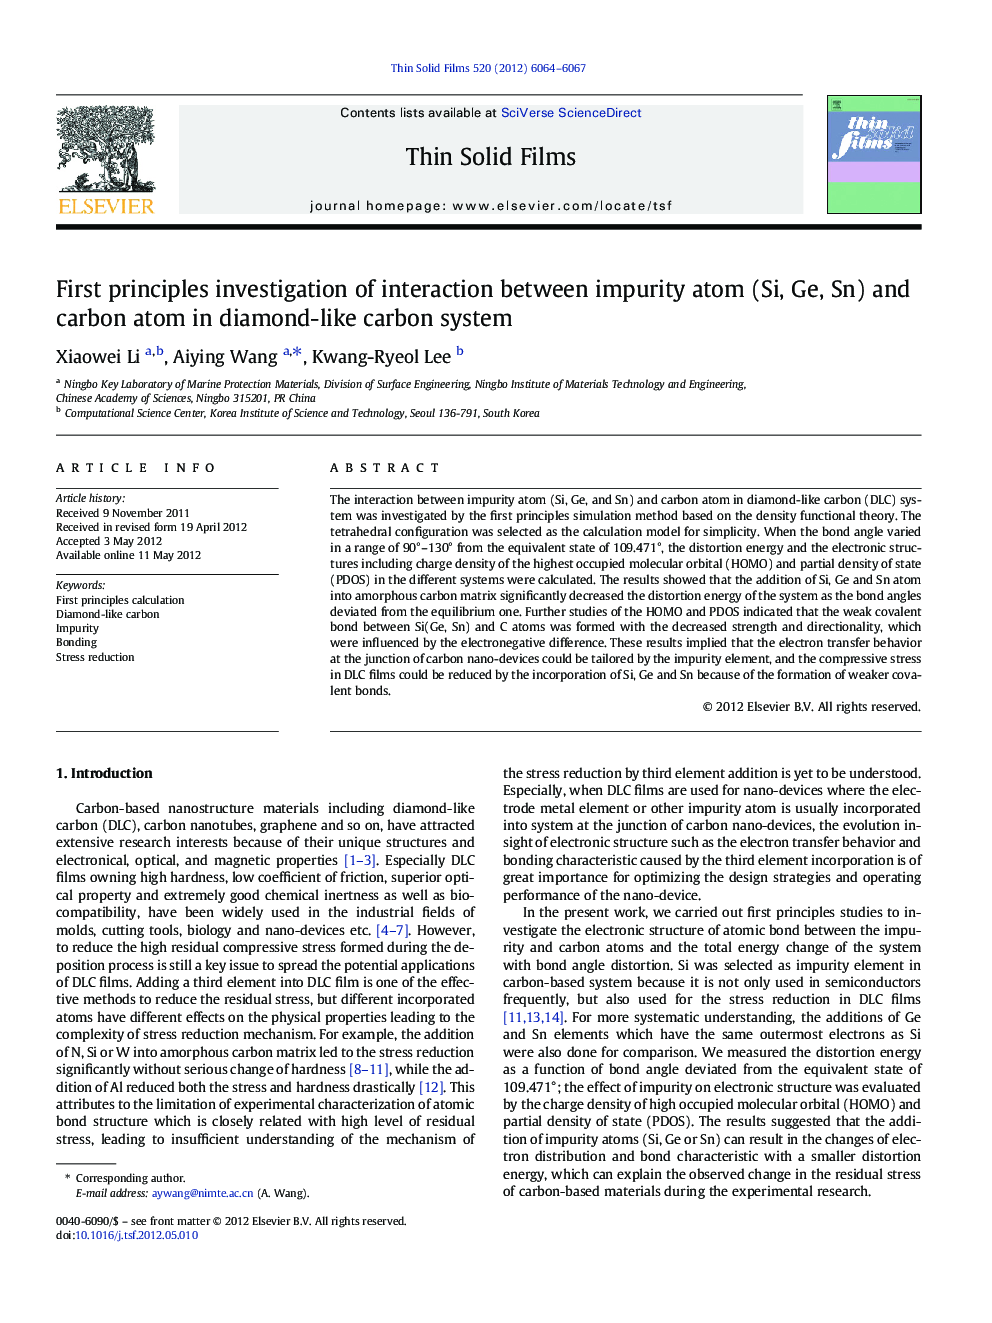 First principles investigation of interaction between impurity atom (Si, Ge, Sn) and carbon atom in diamond-like carbon system